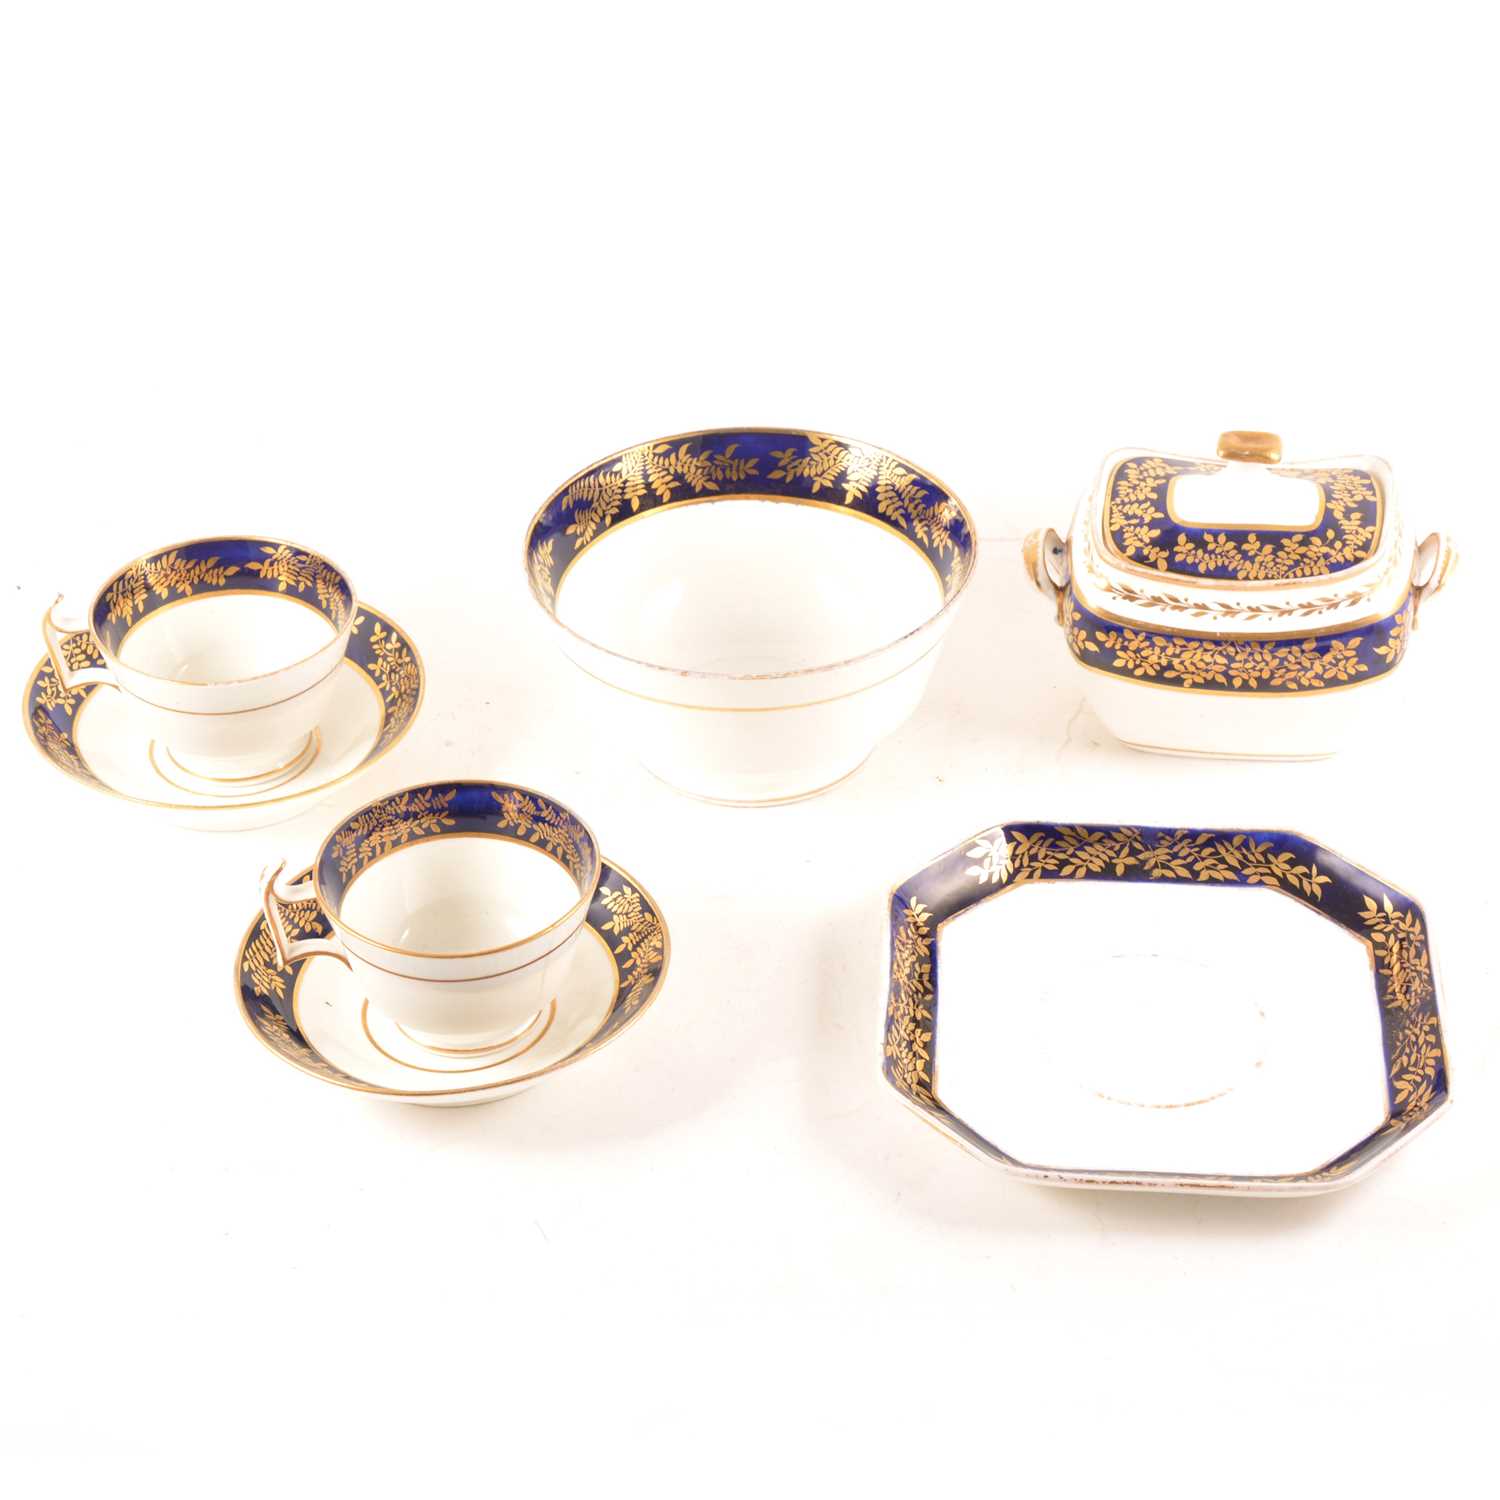 Lot 22 - Spode part teaset, early 19th Century